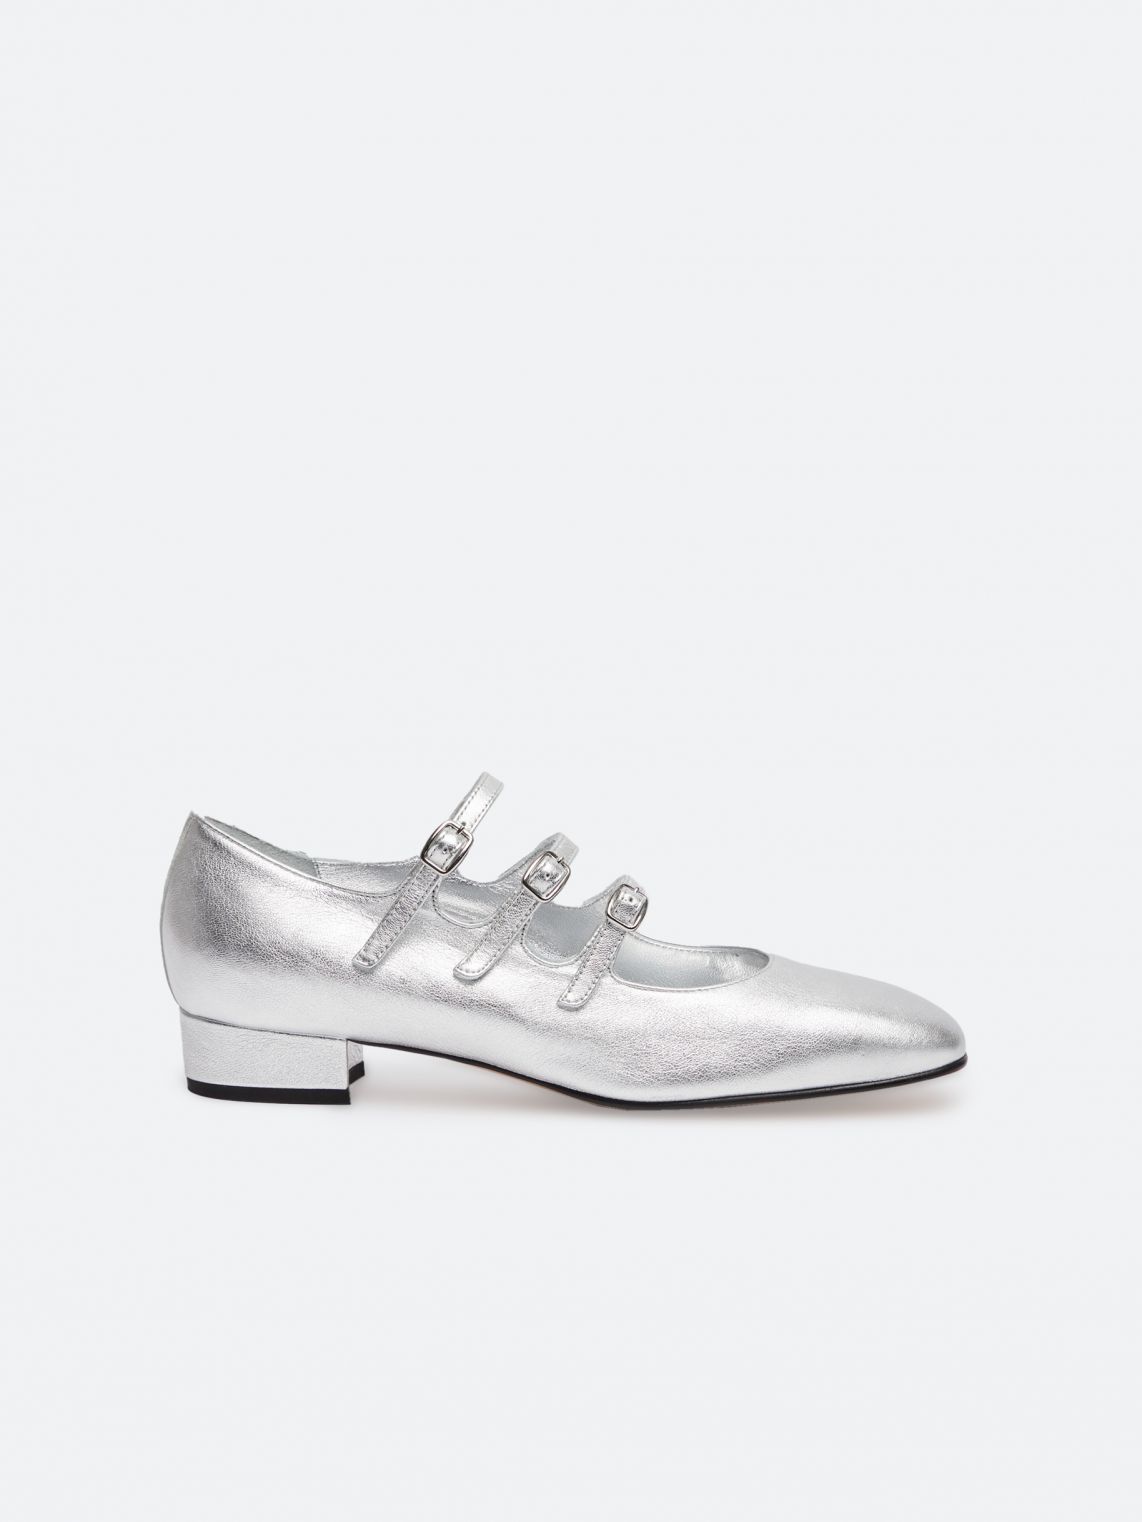 Carel + Ariana Laminated Silver Leather Mary Janes